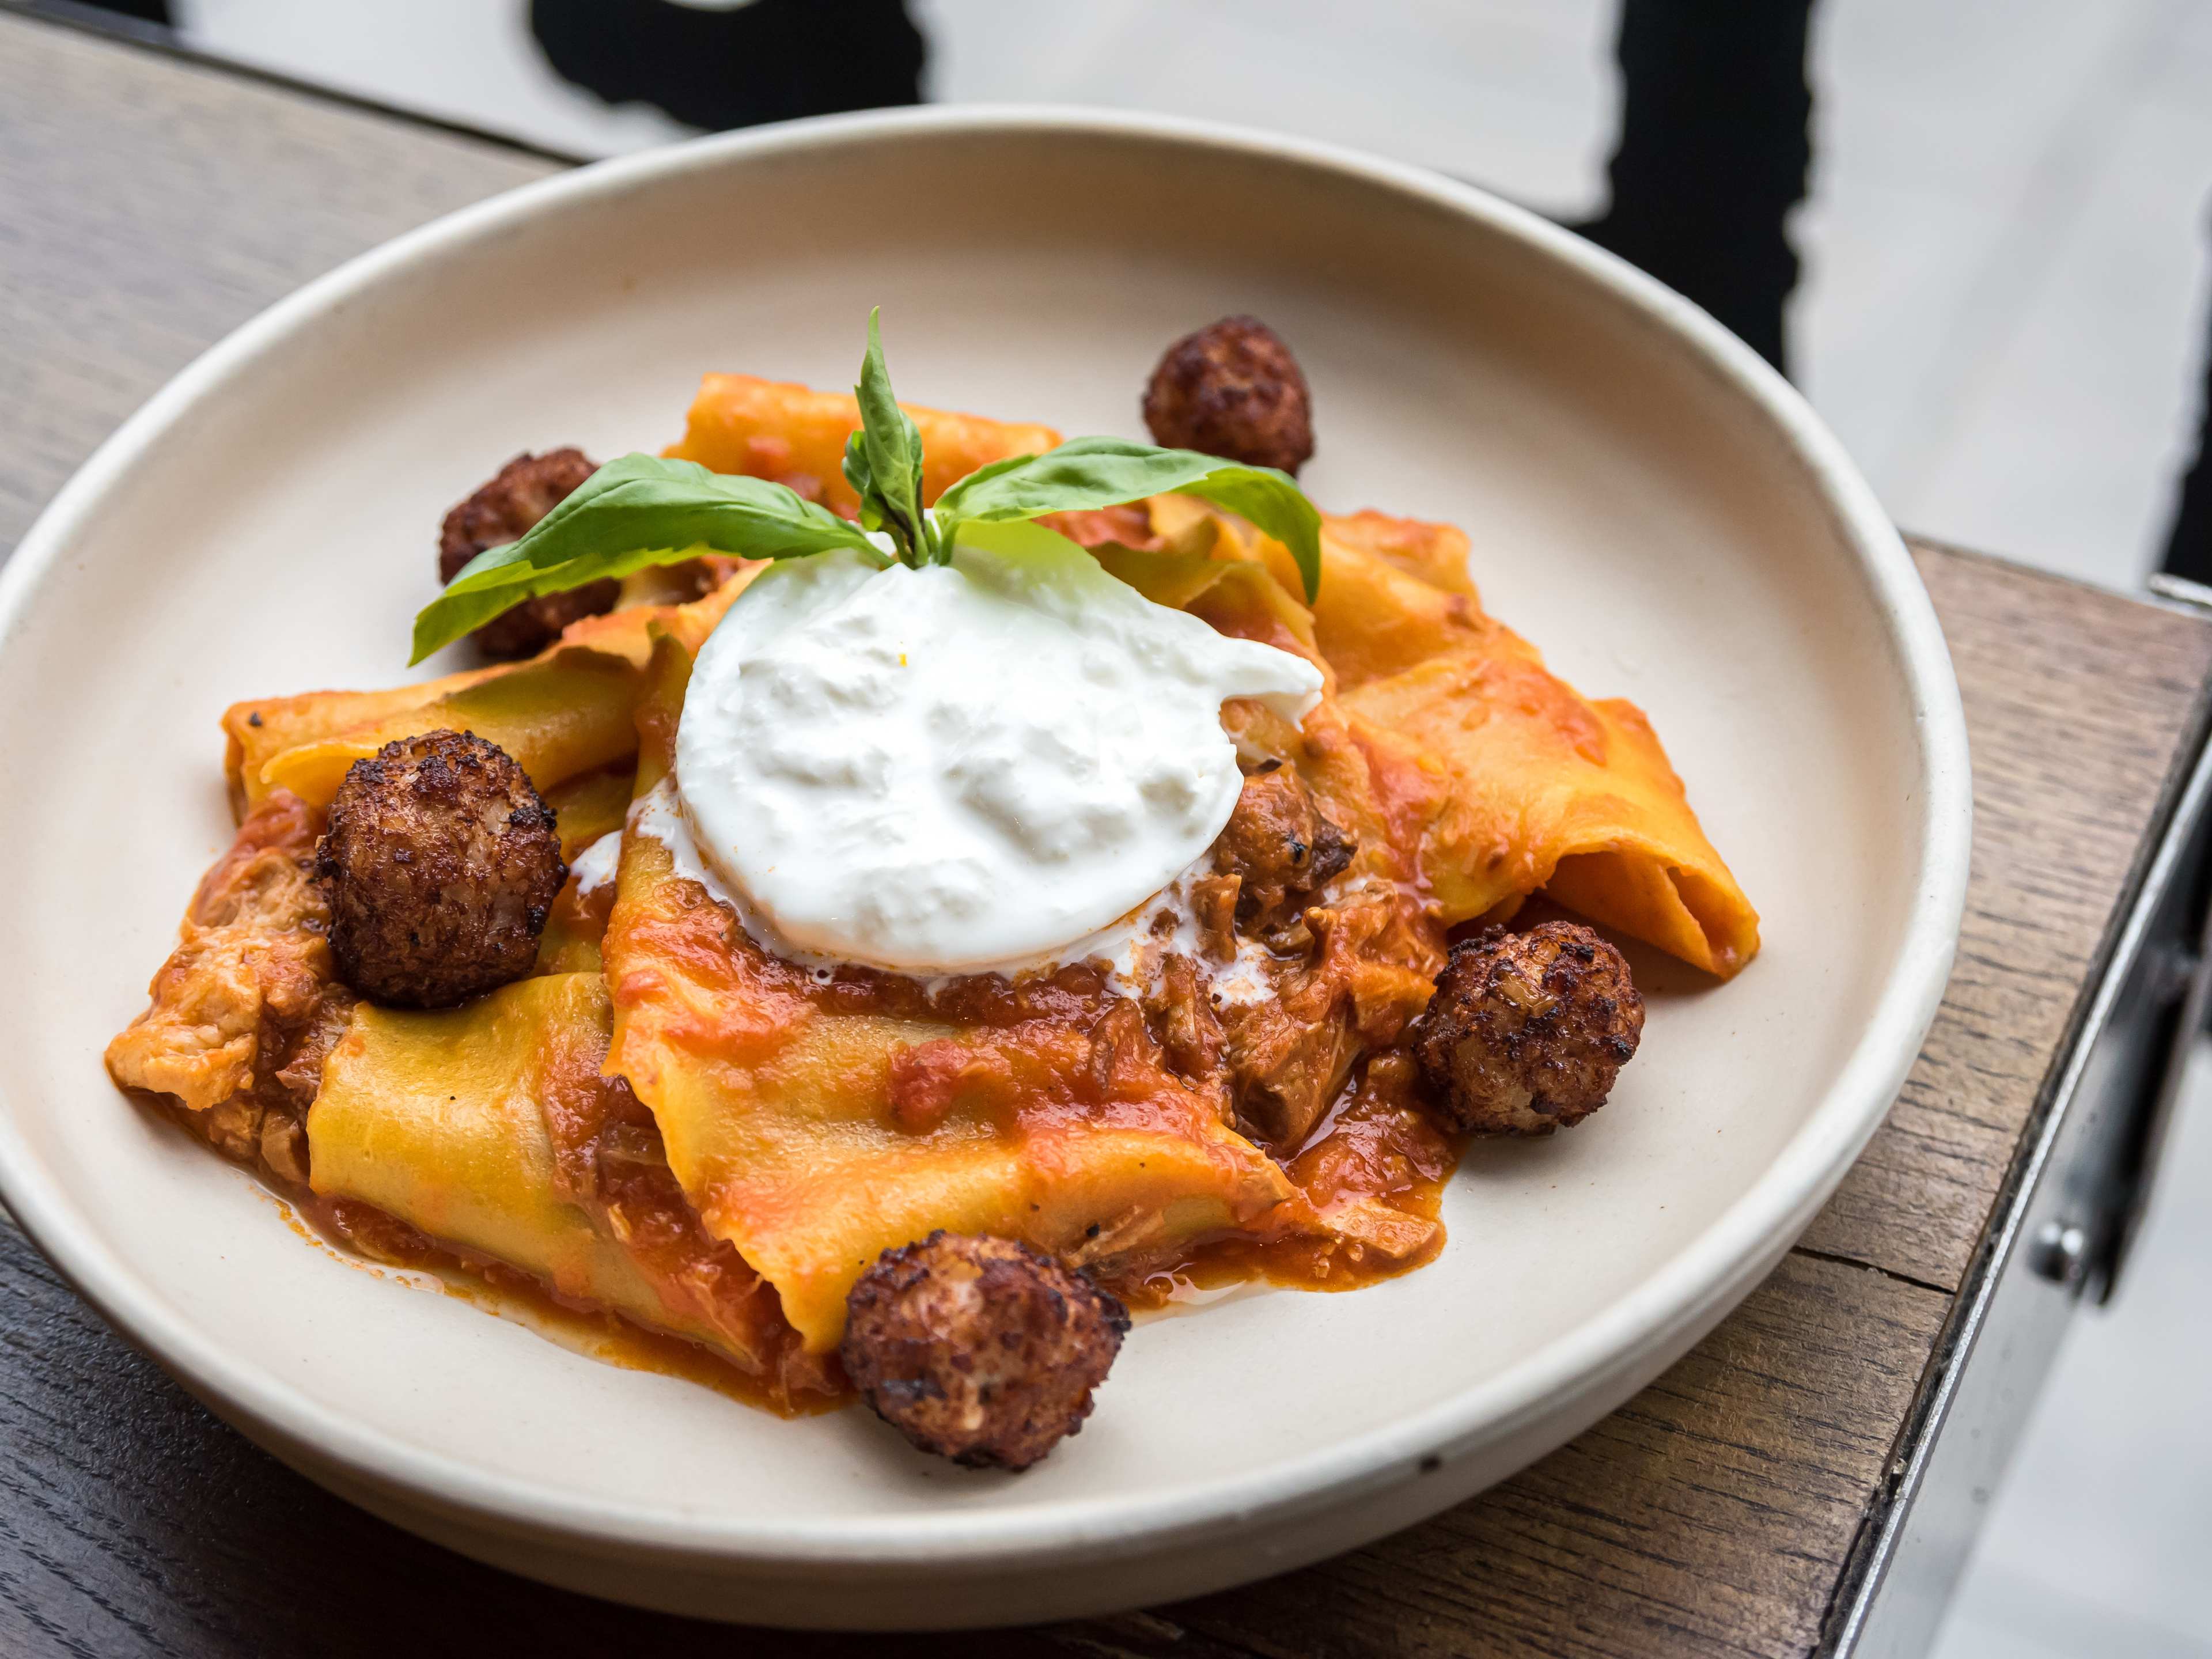 The pappardelle with meatballs and burrata from Officina 00.